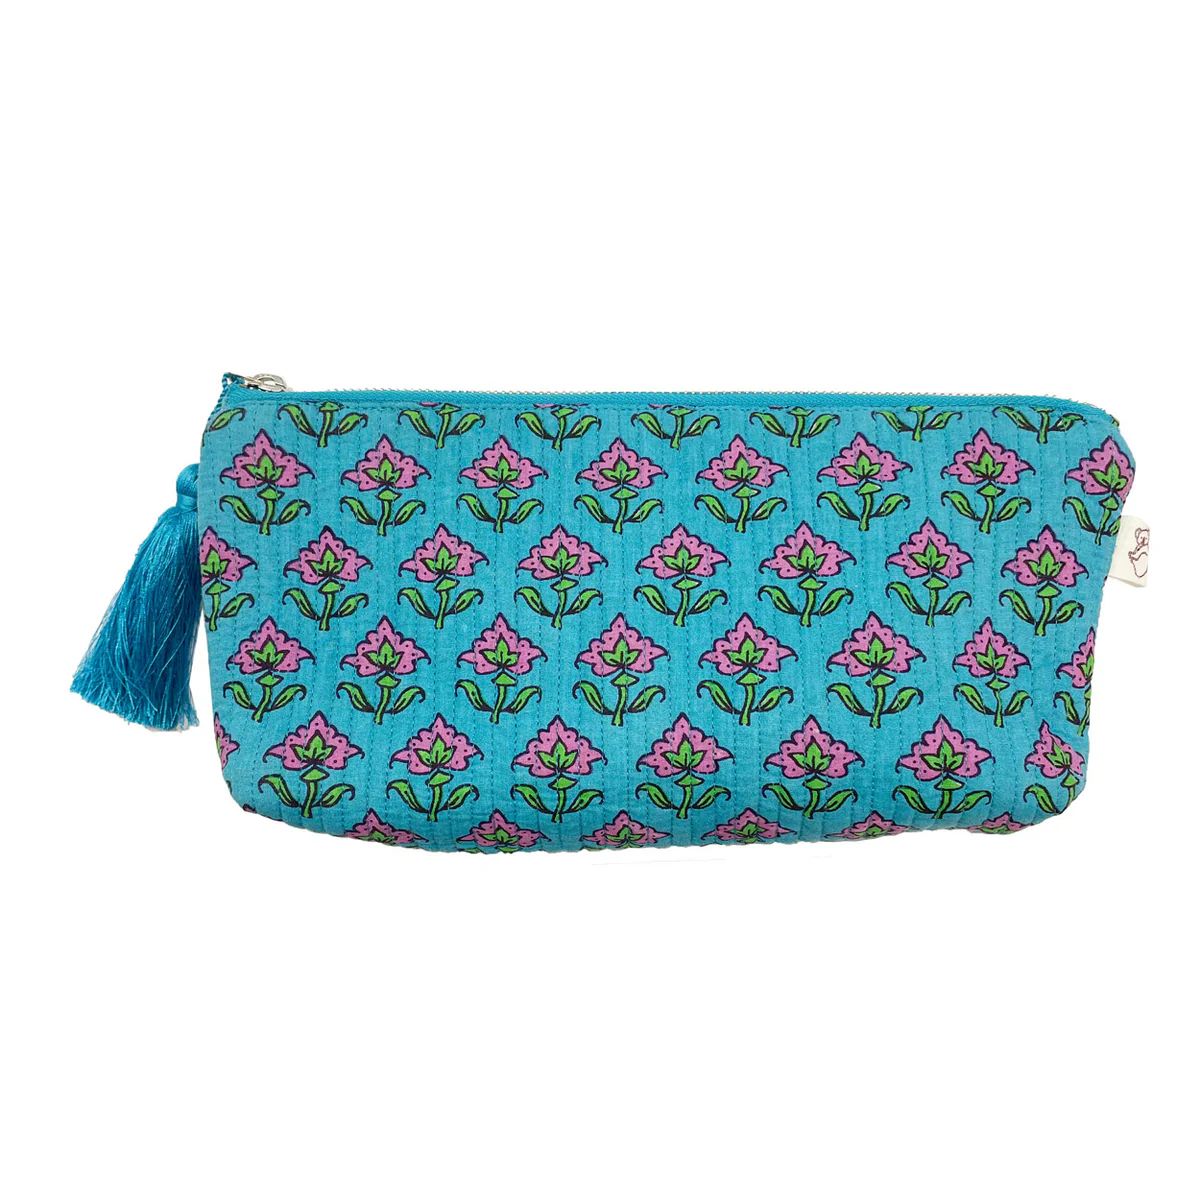 Hold Me Clutch - Quilted Blue Floral Just $28.80 with code GETHAPPY | Quilted Koala